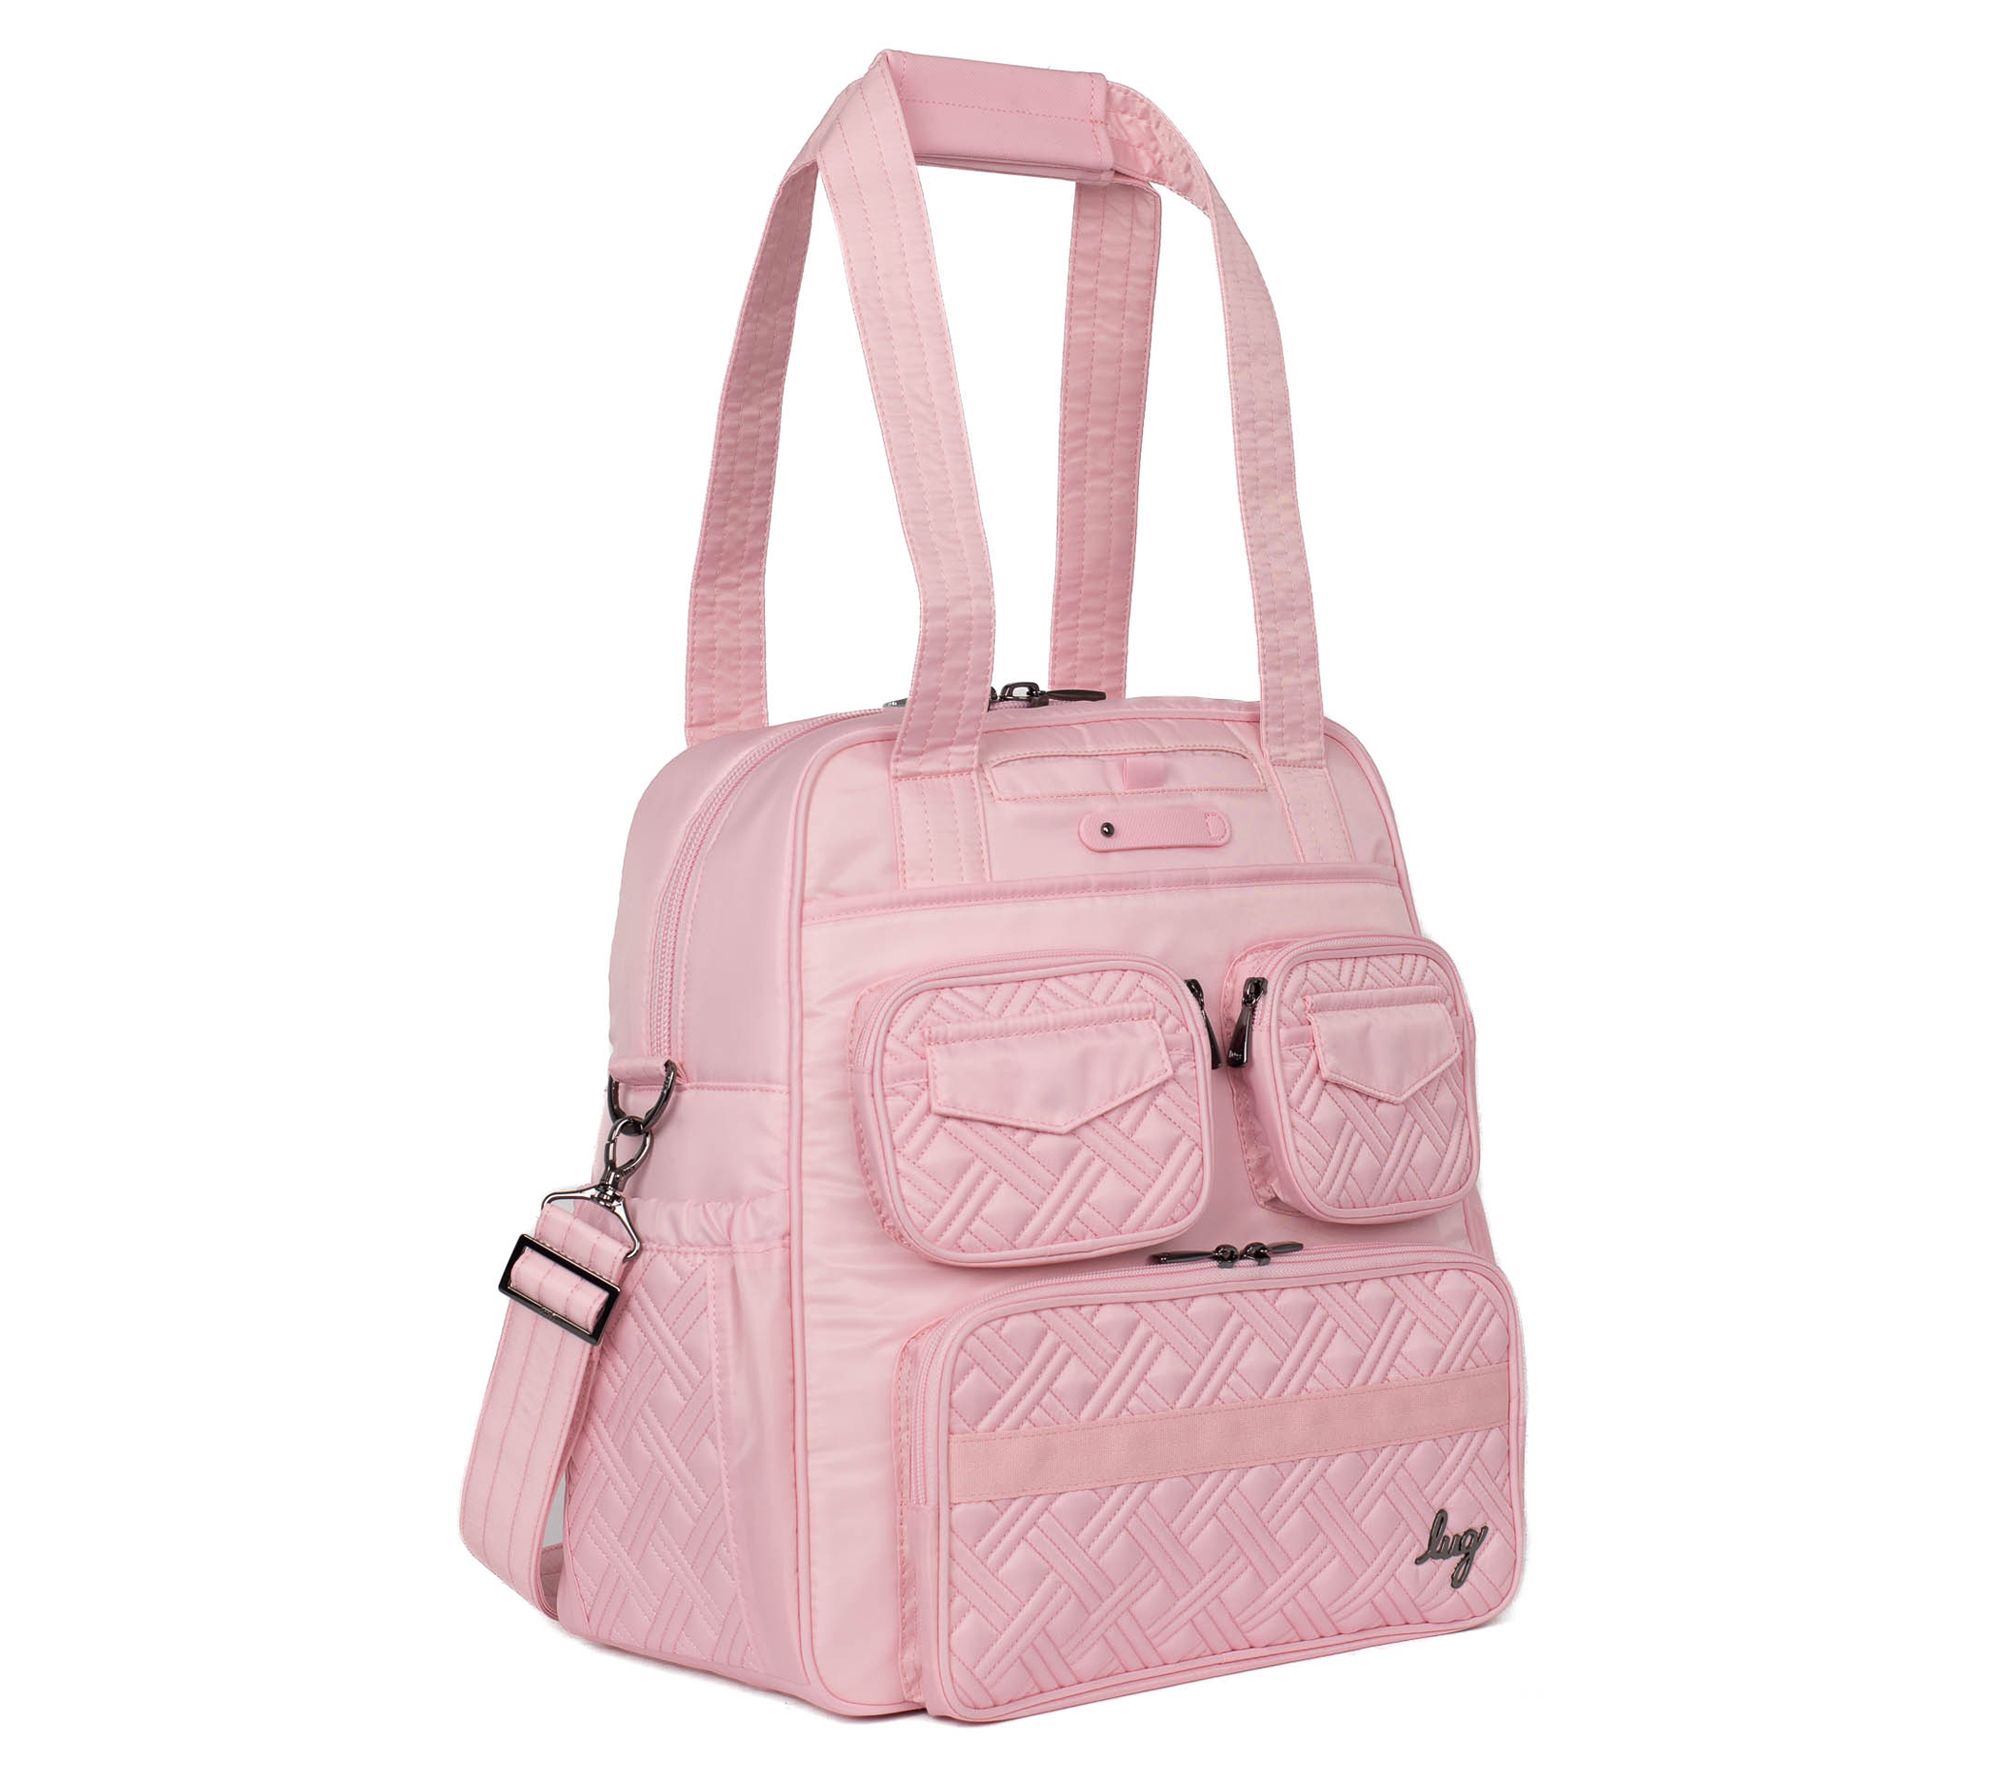 LUG CAN CAN BAG PINK CAMO SOLD OUT